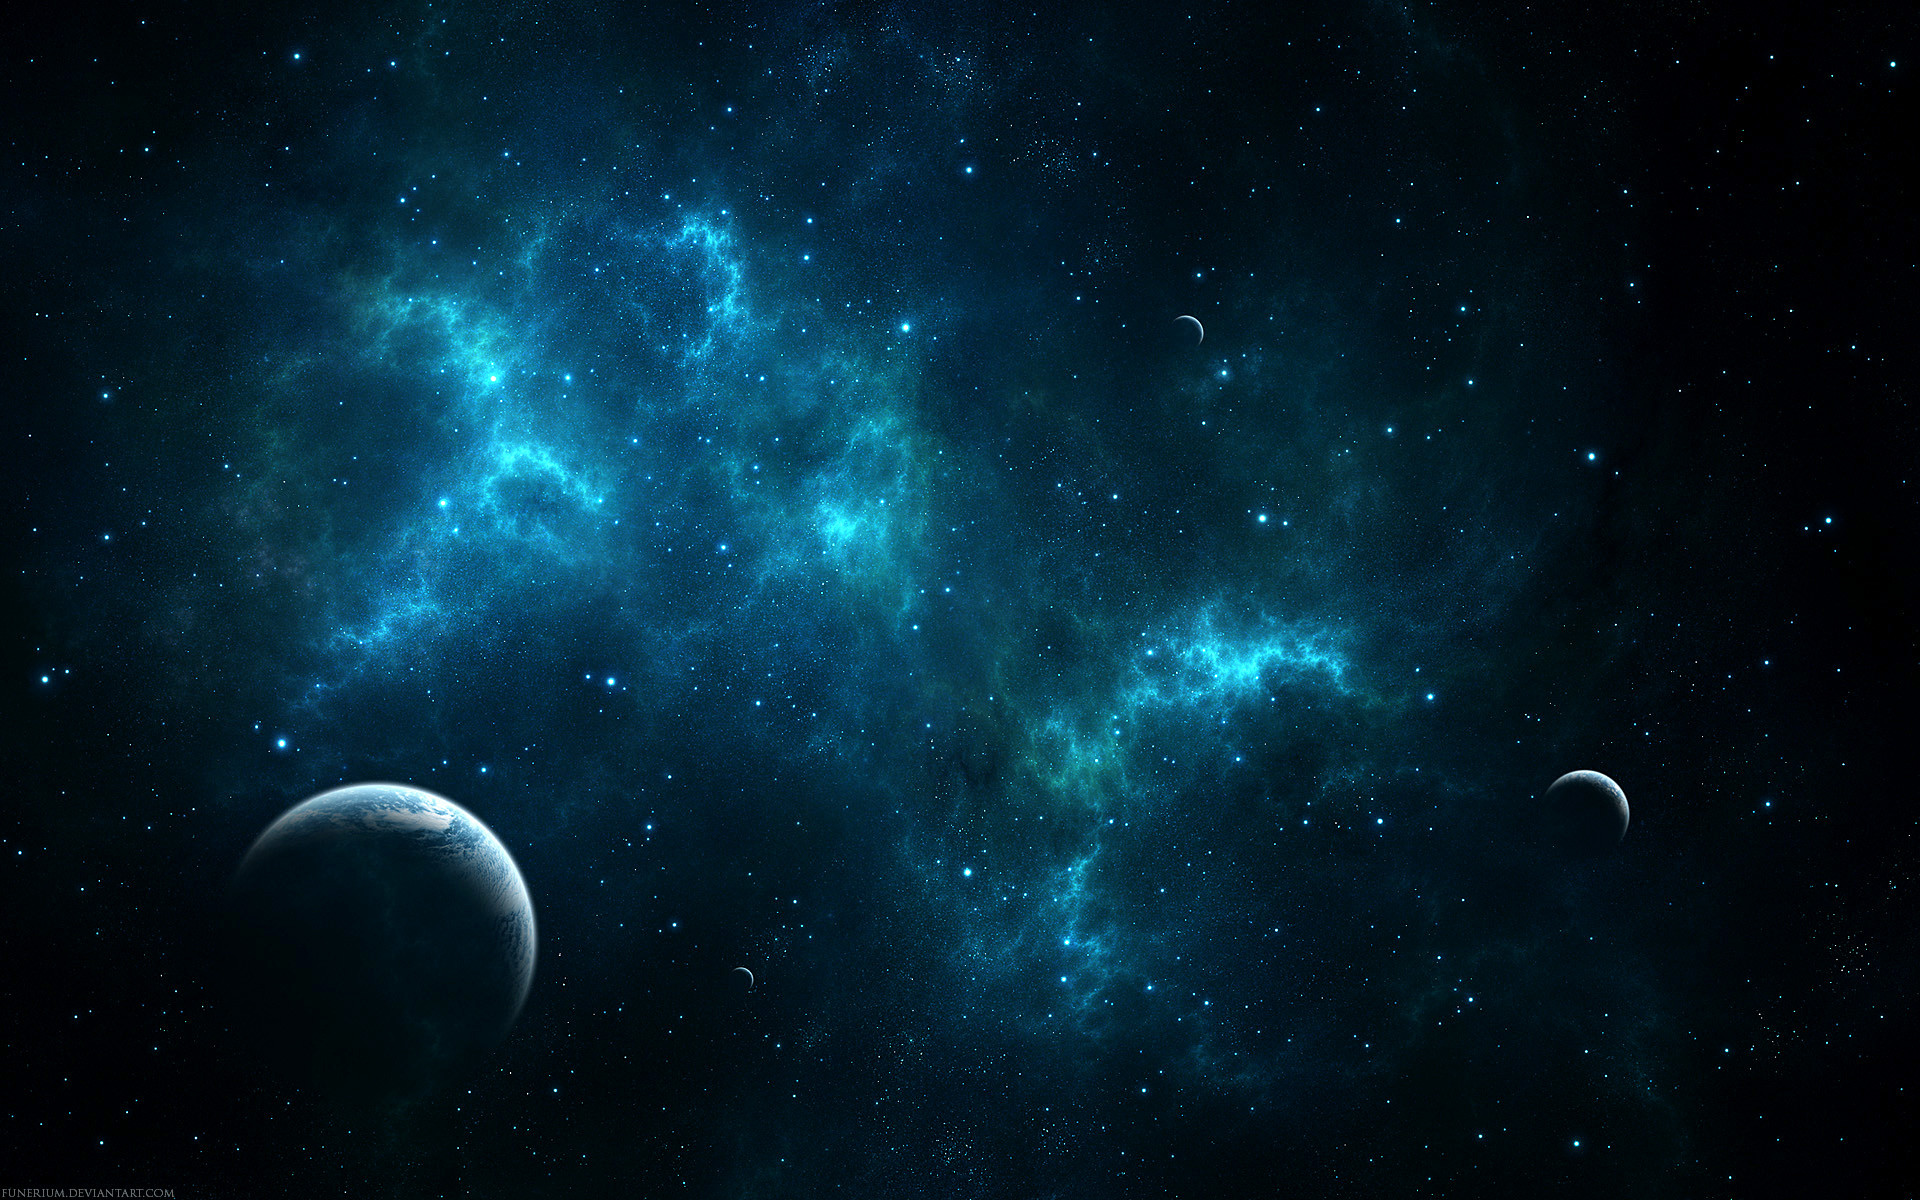 1920x1200 Space HD Wallpapers #SpaceHDWallpapers #Space #hdwallpapers #wallpapers